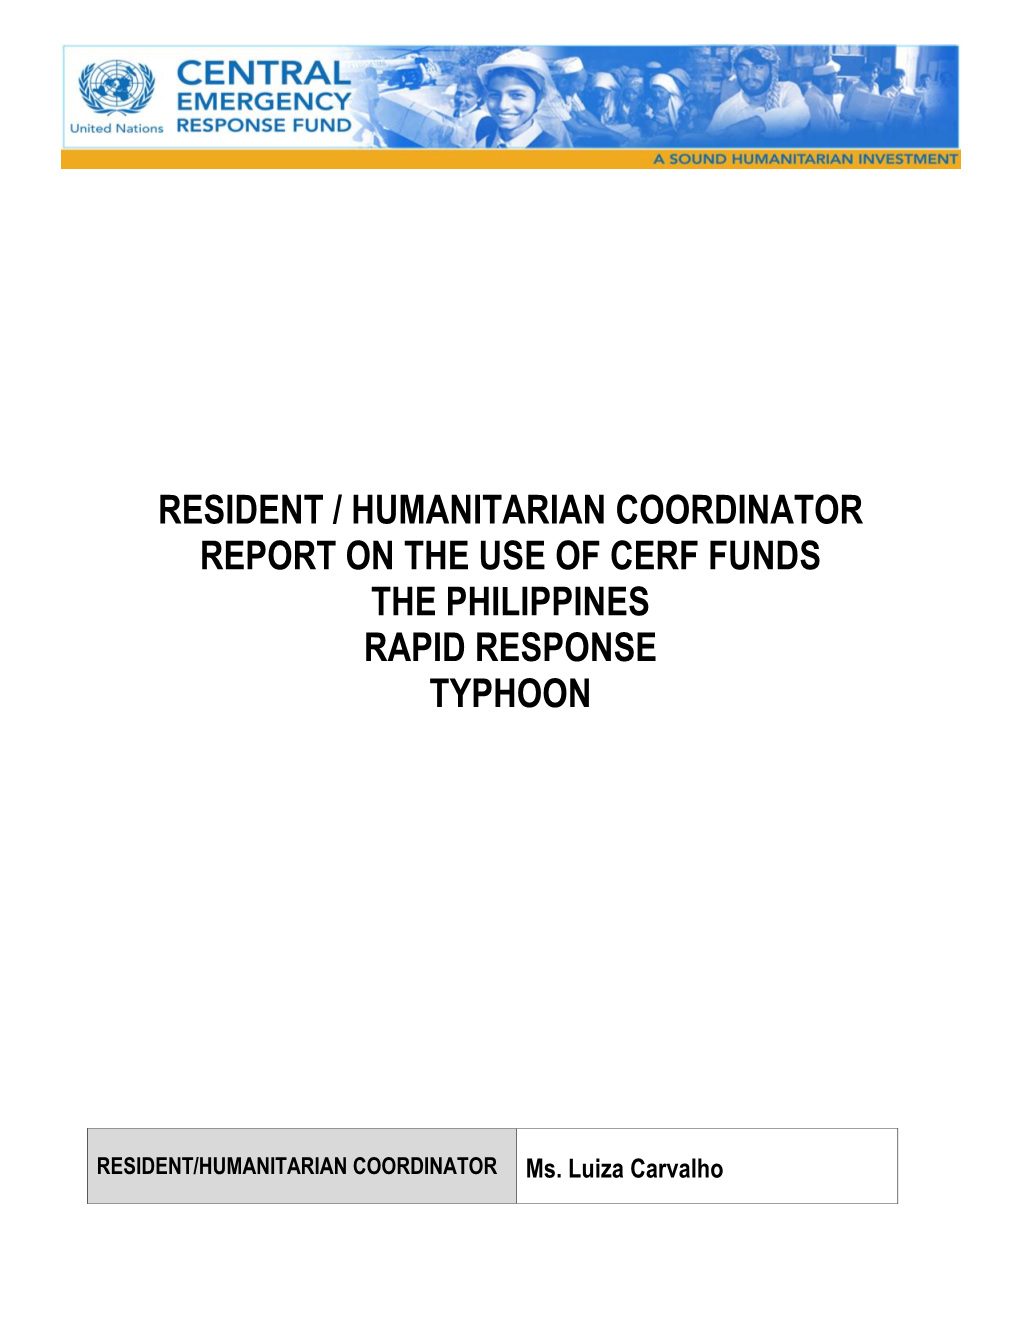 Resident / Humanitarian Coordinator Report on the Use of Cerf Funds the Philippines Rapid Response Typhoon